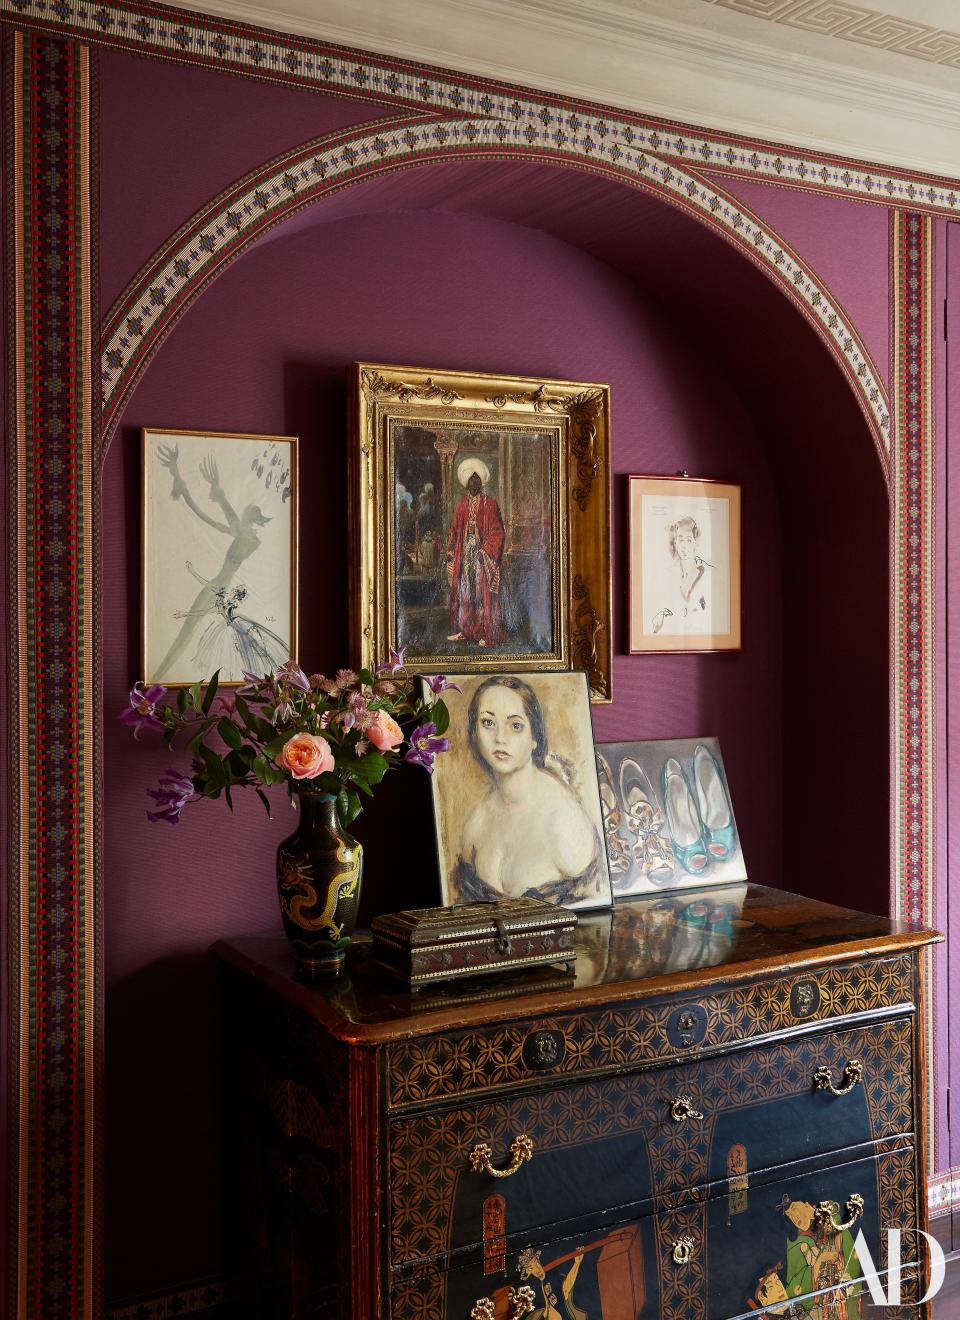 A niche in the bedroom holds artworks by Cecil Beaton, Christian Bérard, Lila de Nobili, and Anh Duong. 19th-century French cabinet with Japanese-style lacquer.